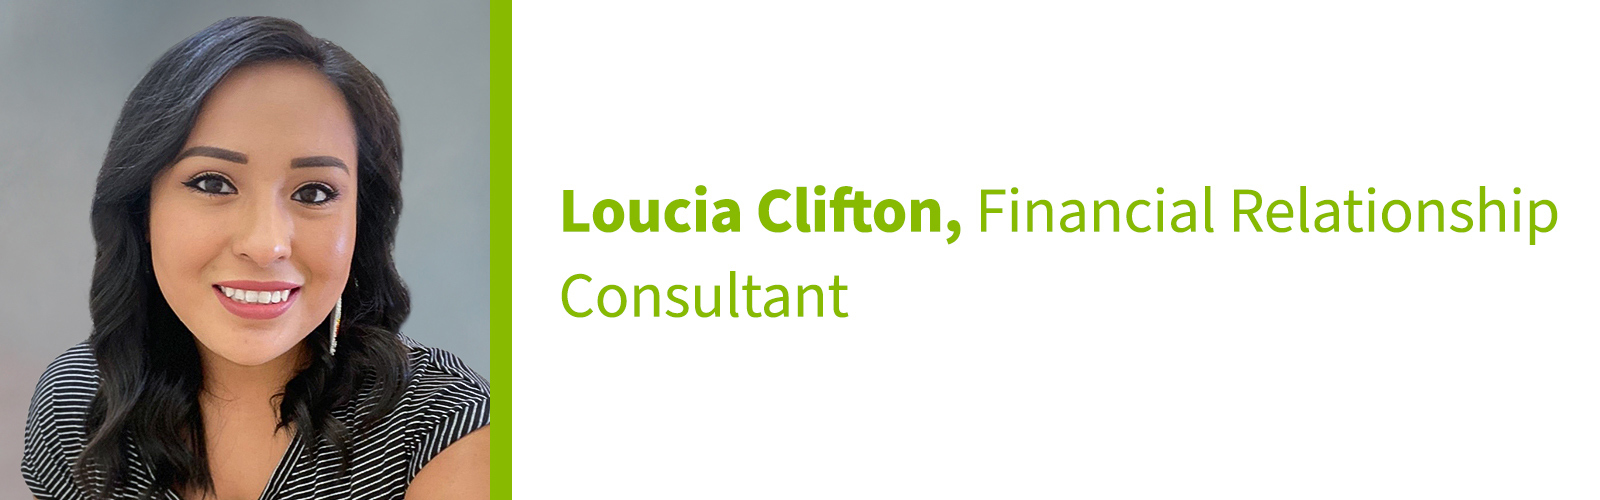 Loucia Clifton, Financial Relationship Consultant